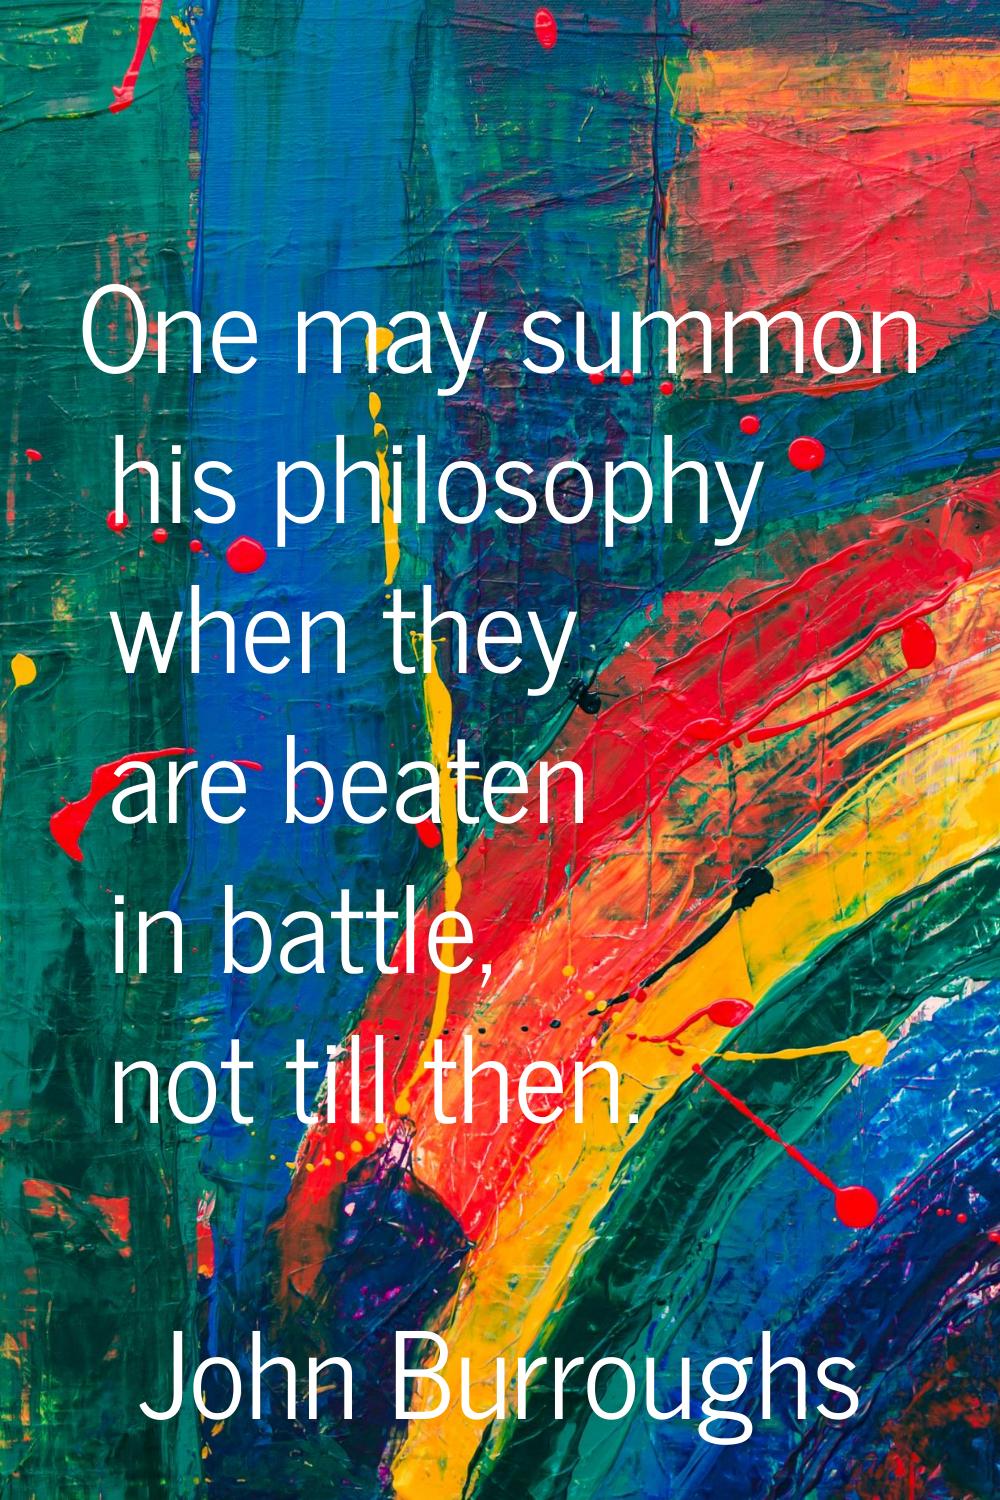 One may summon his philosophy when they are beaten in battle, not till then.